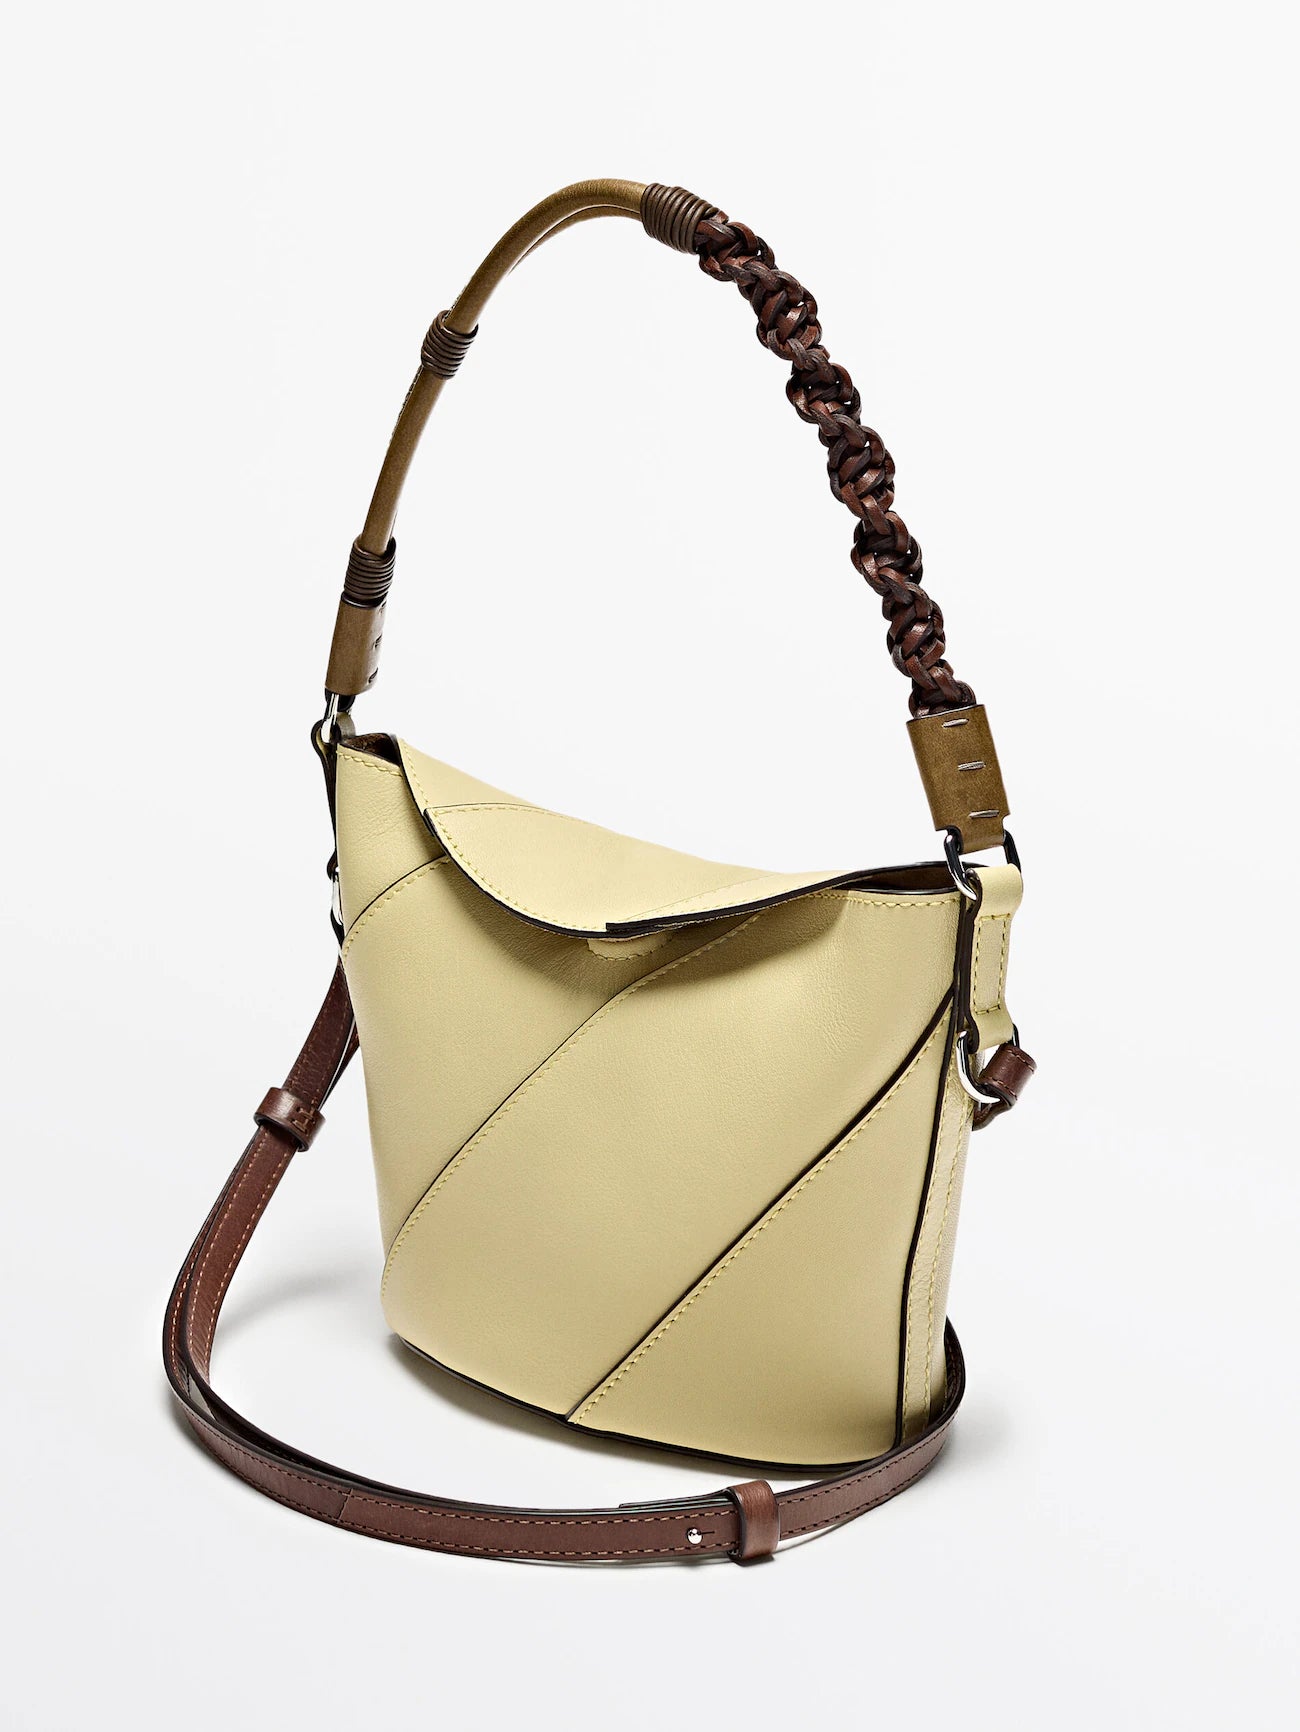 Nappa leather crossbody bag with woven strap